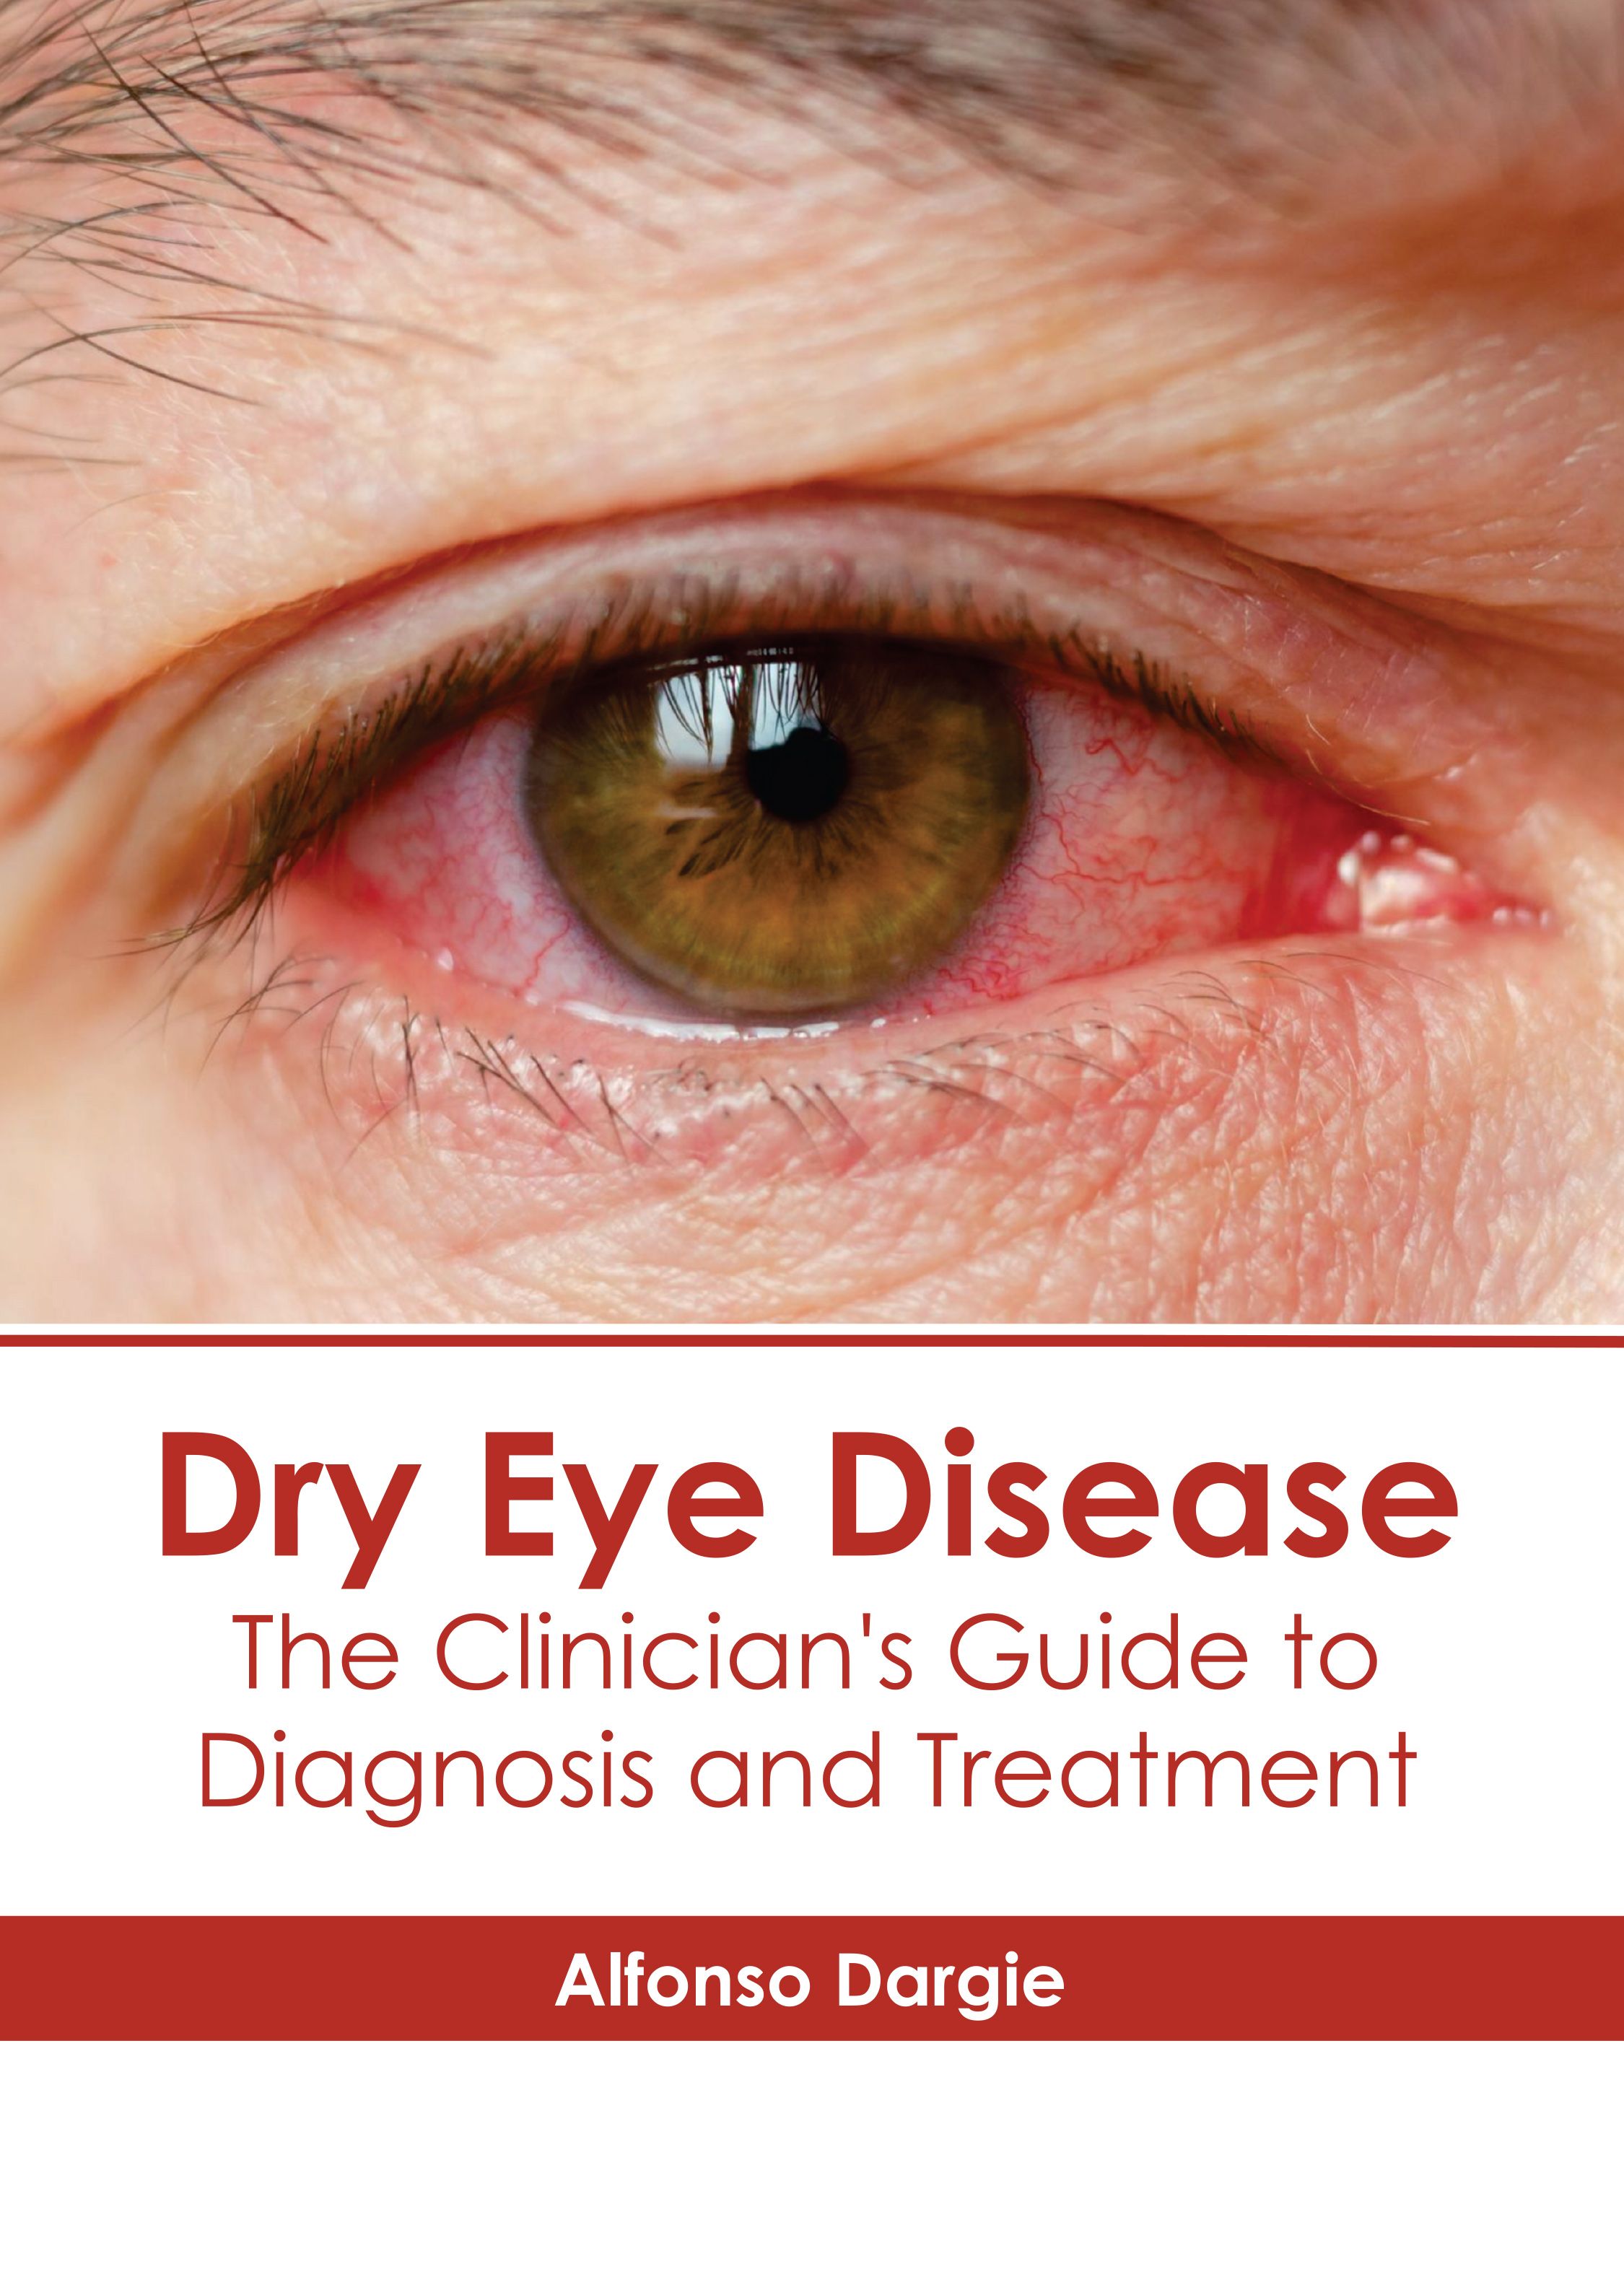 

medical-reference-books/ophthalmology/dry-eye-disease-the-clinician-s-guide-to-diagnosis-and-treatment-9798887400792